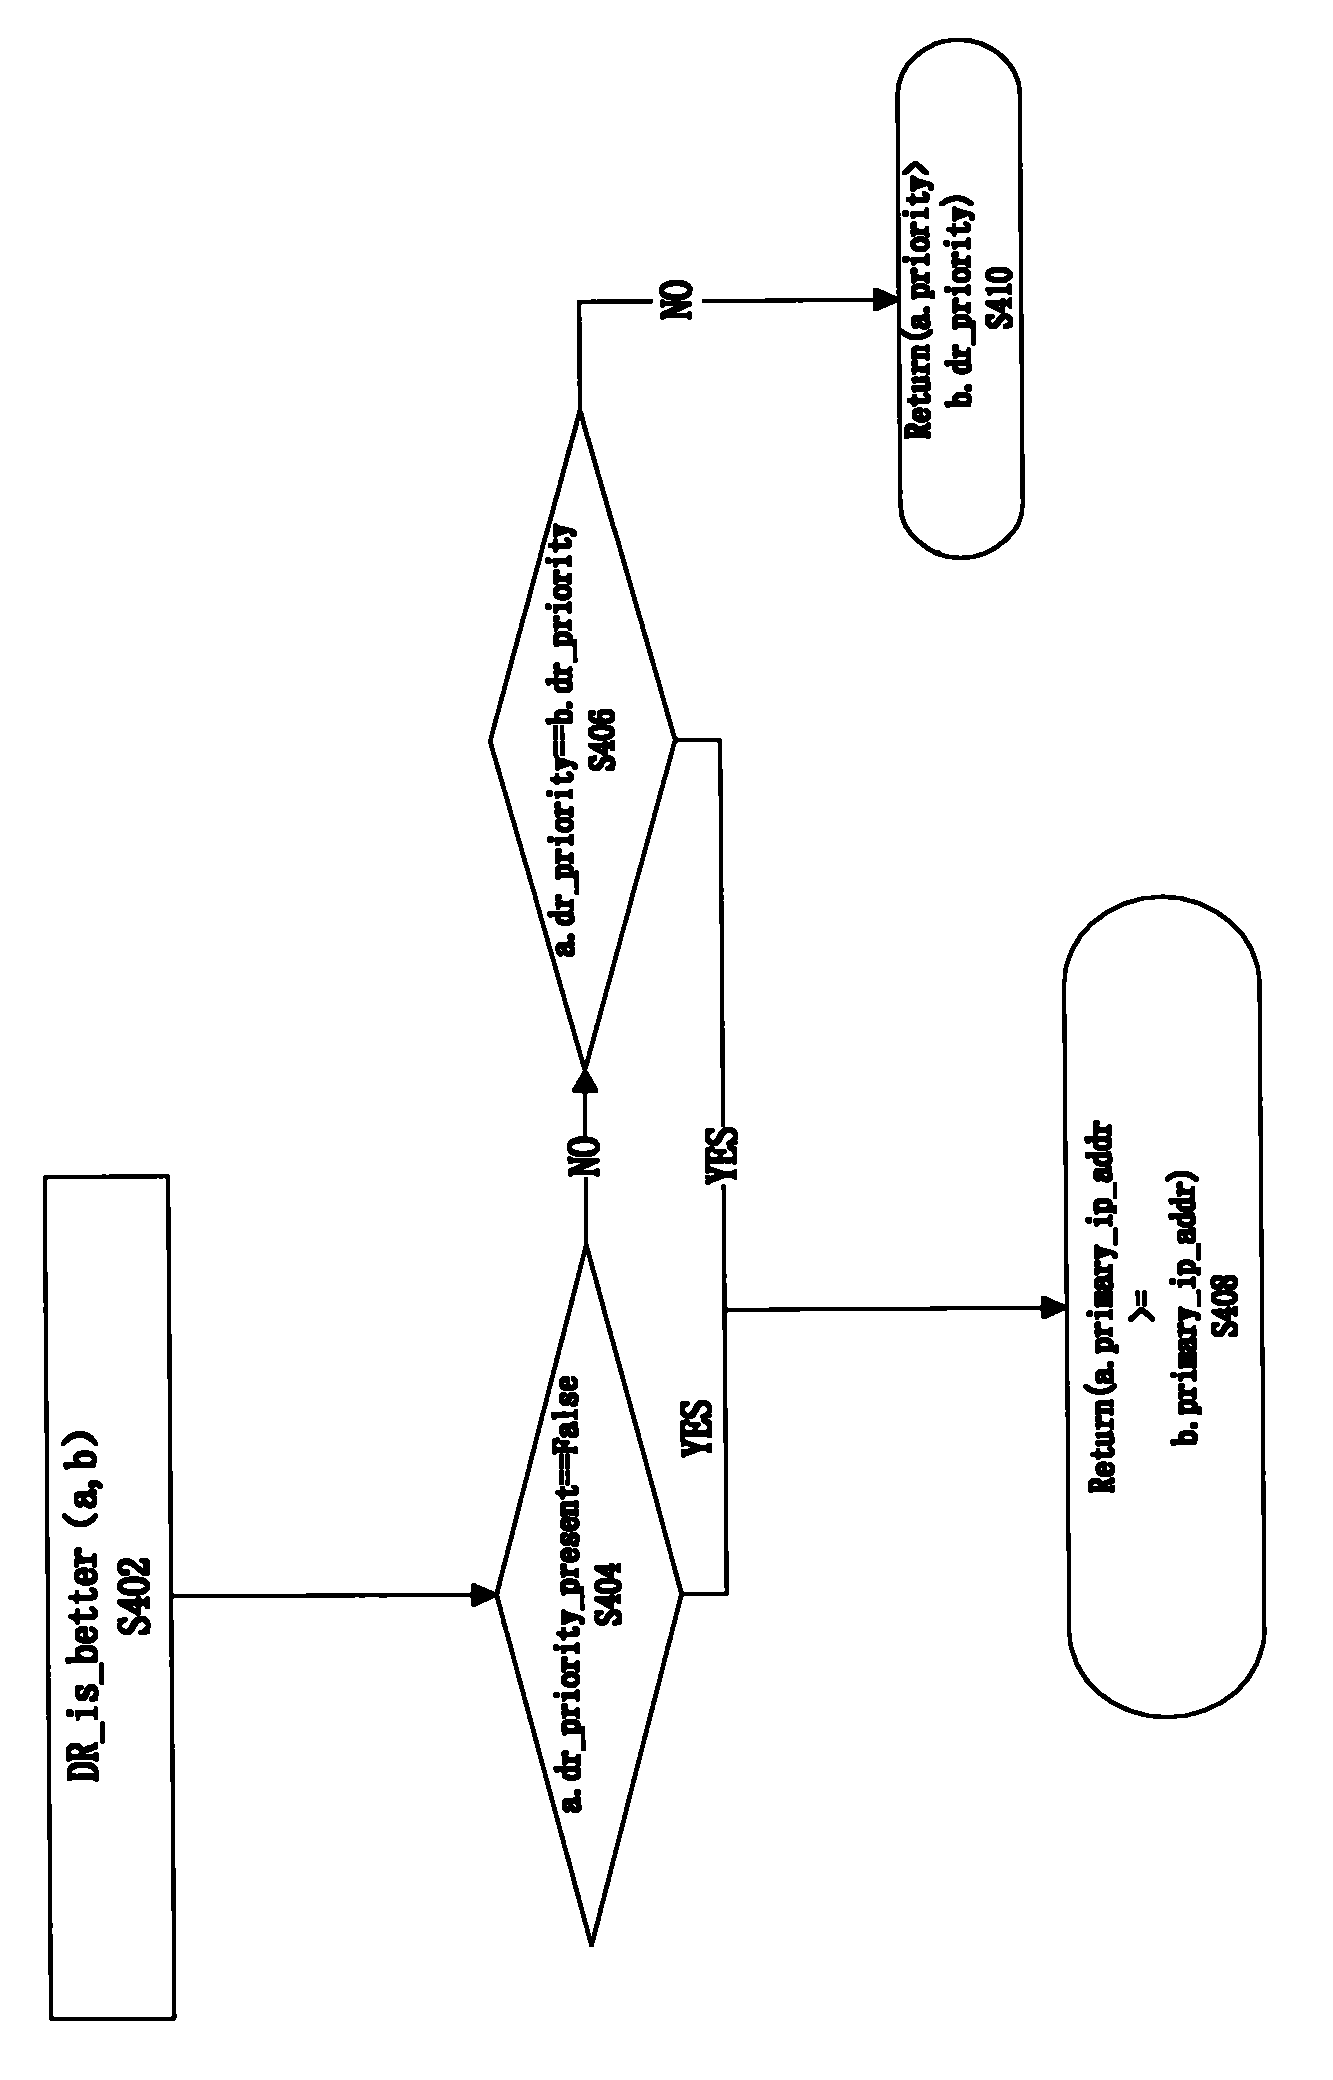 Method for protecting DR (designated router) redundancy in PIM-SM (protocol independent multicast-sparse mode)